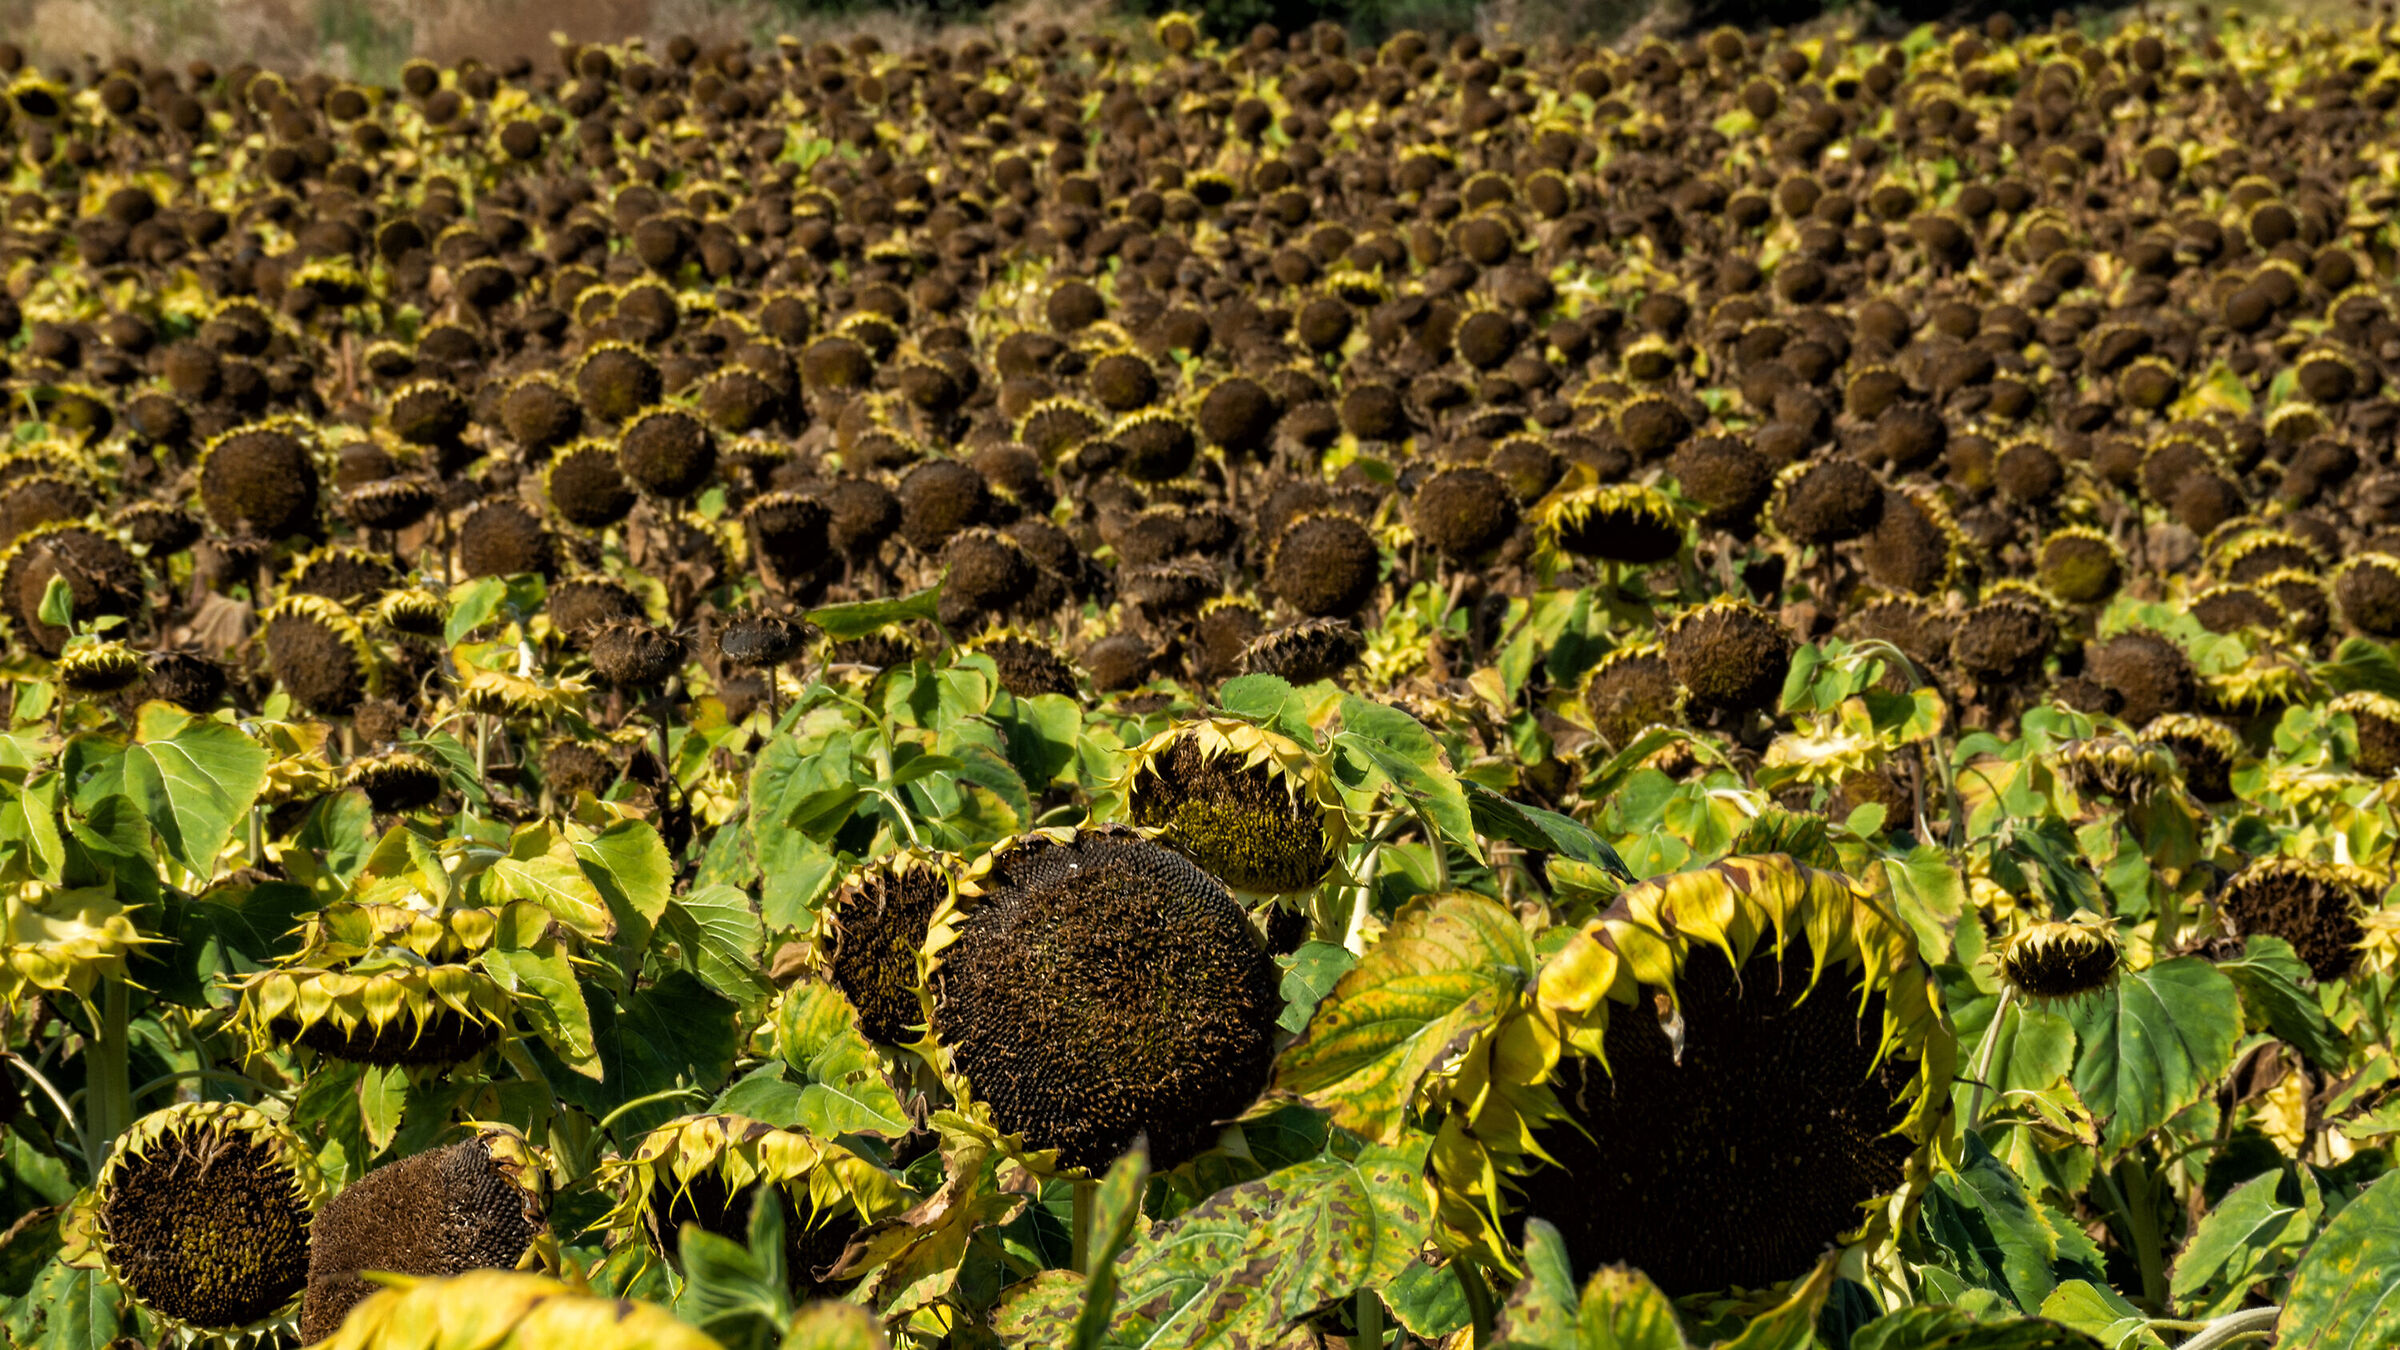 The expanse of former sunflowers...